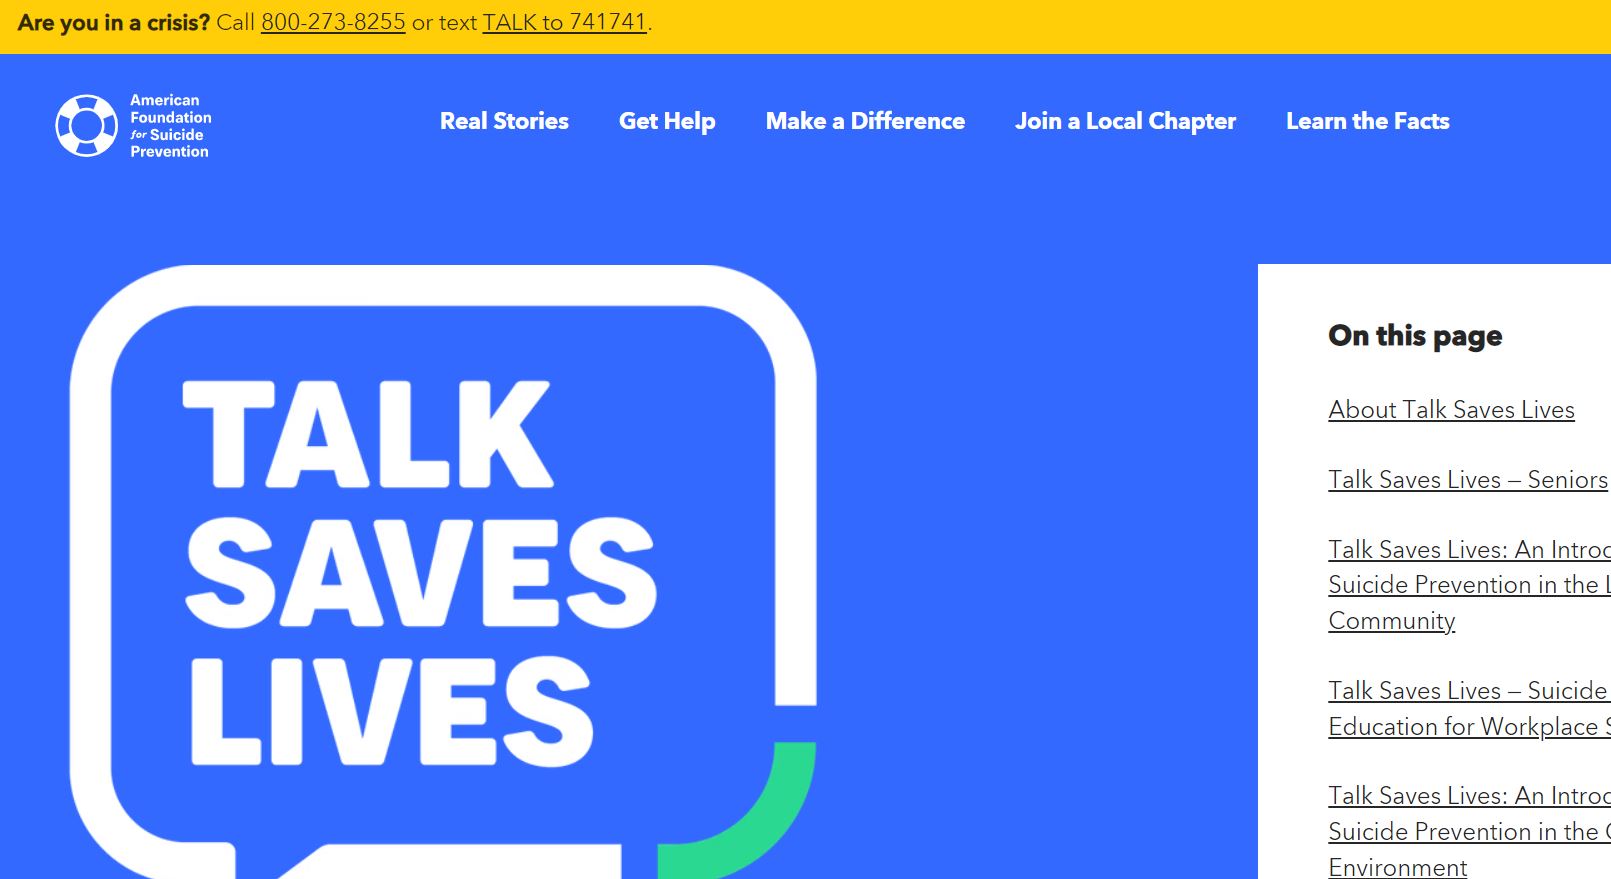 AFSP: Talk Saves Lives™ An Introduction to Suicide Prevention in the LGBTQ Community 